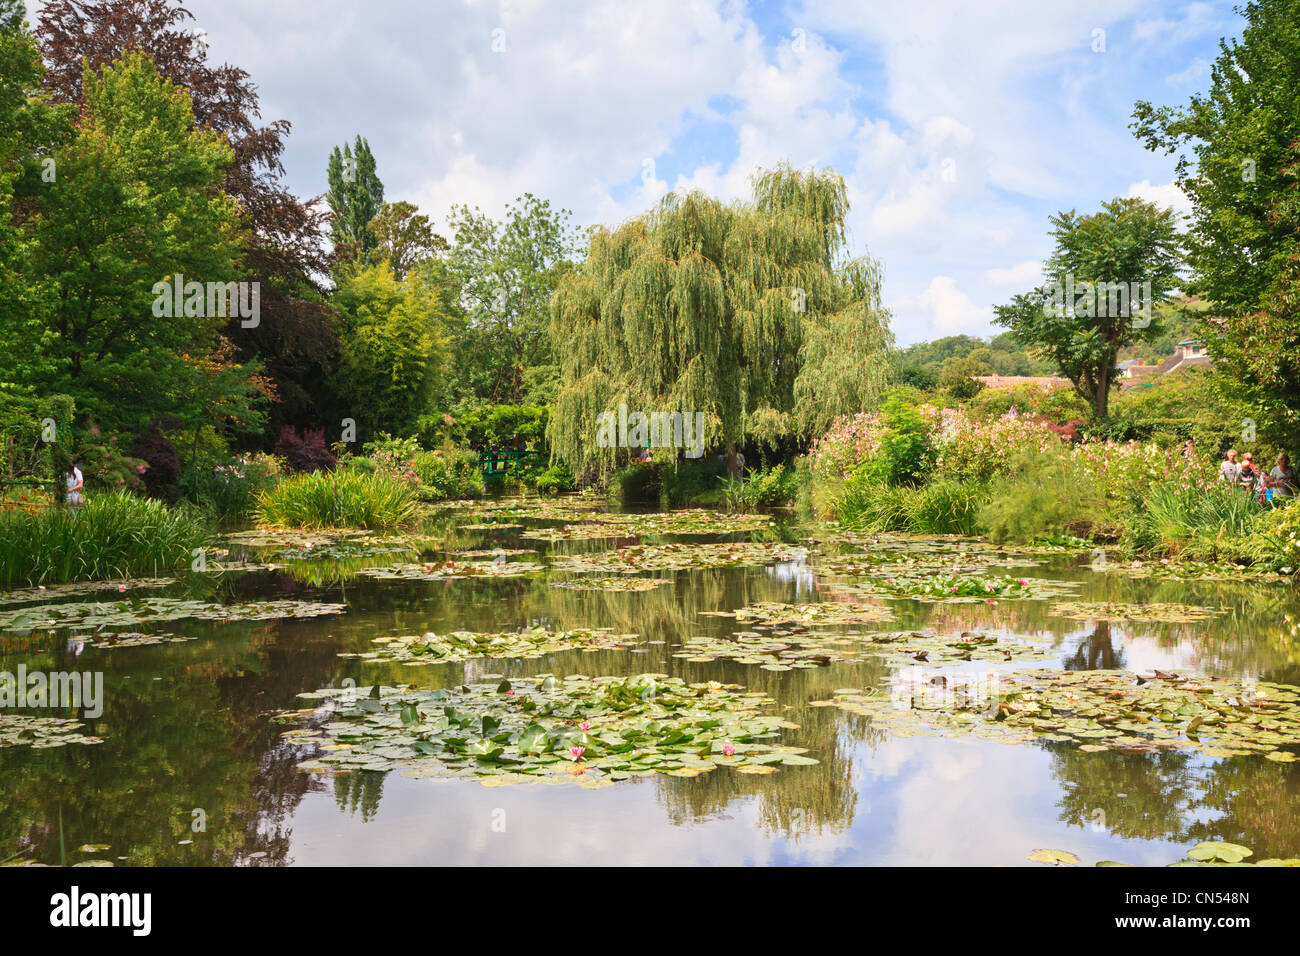 Lily pond and water lilies, Monet's Garden, Giverny, Normandy, France. Stock Photo